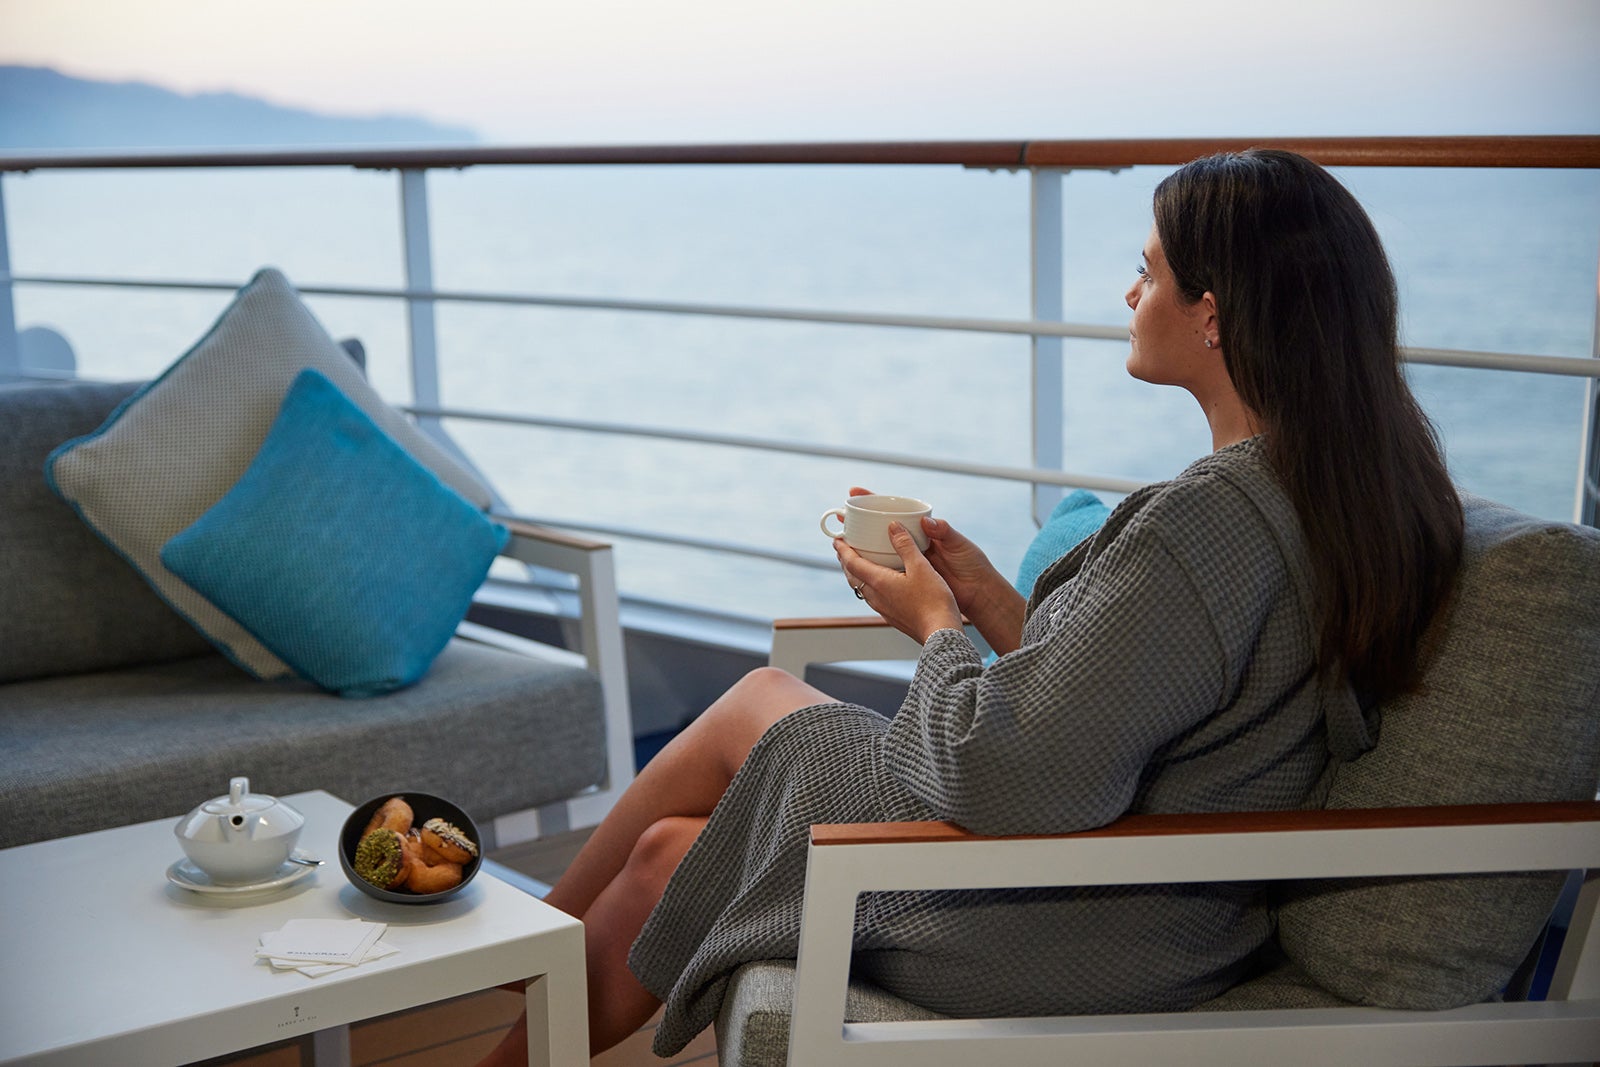 what cruise lines do singles cruises